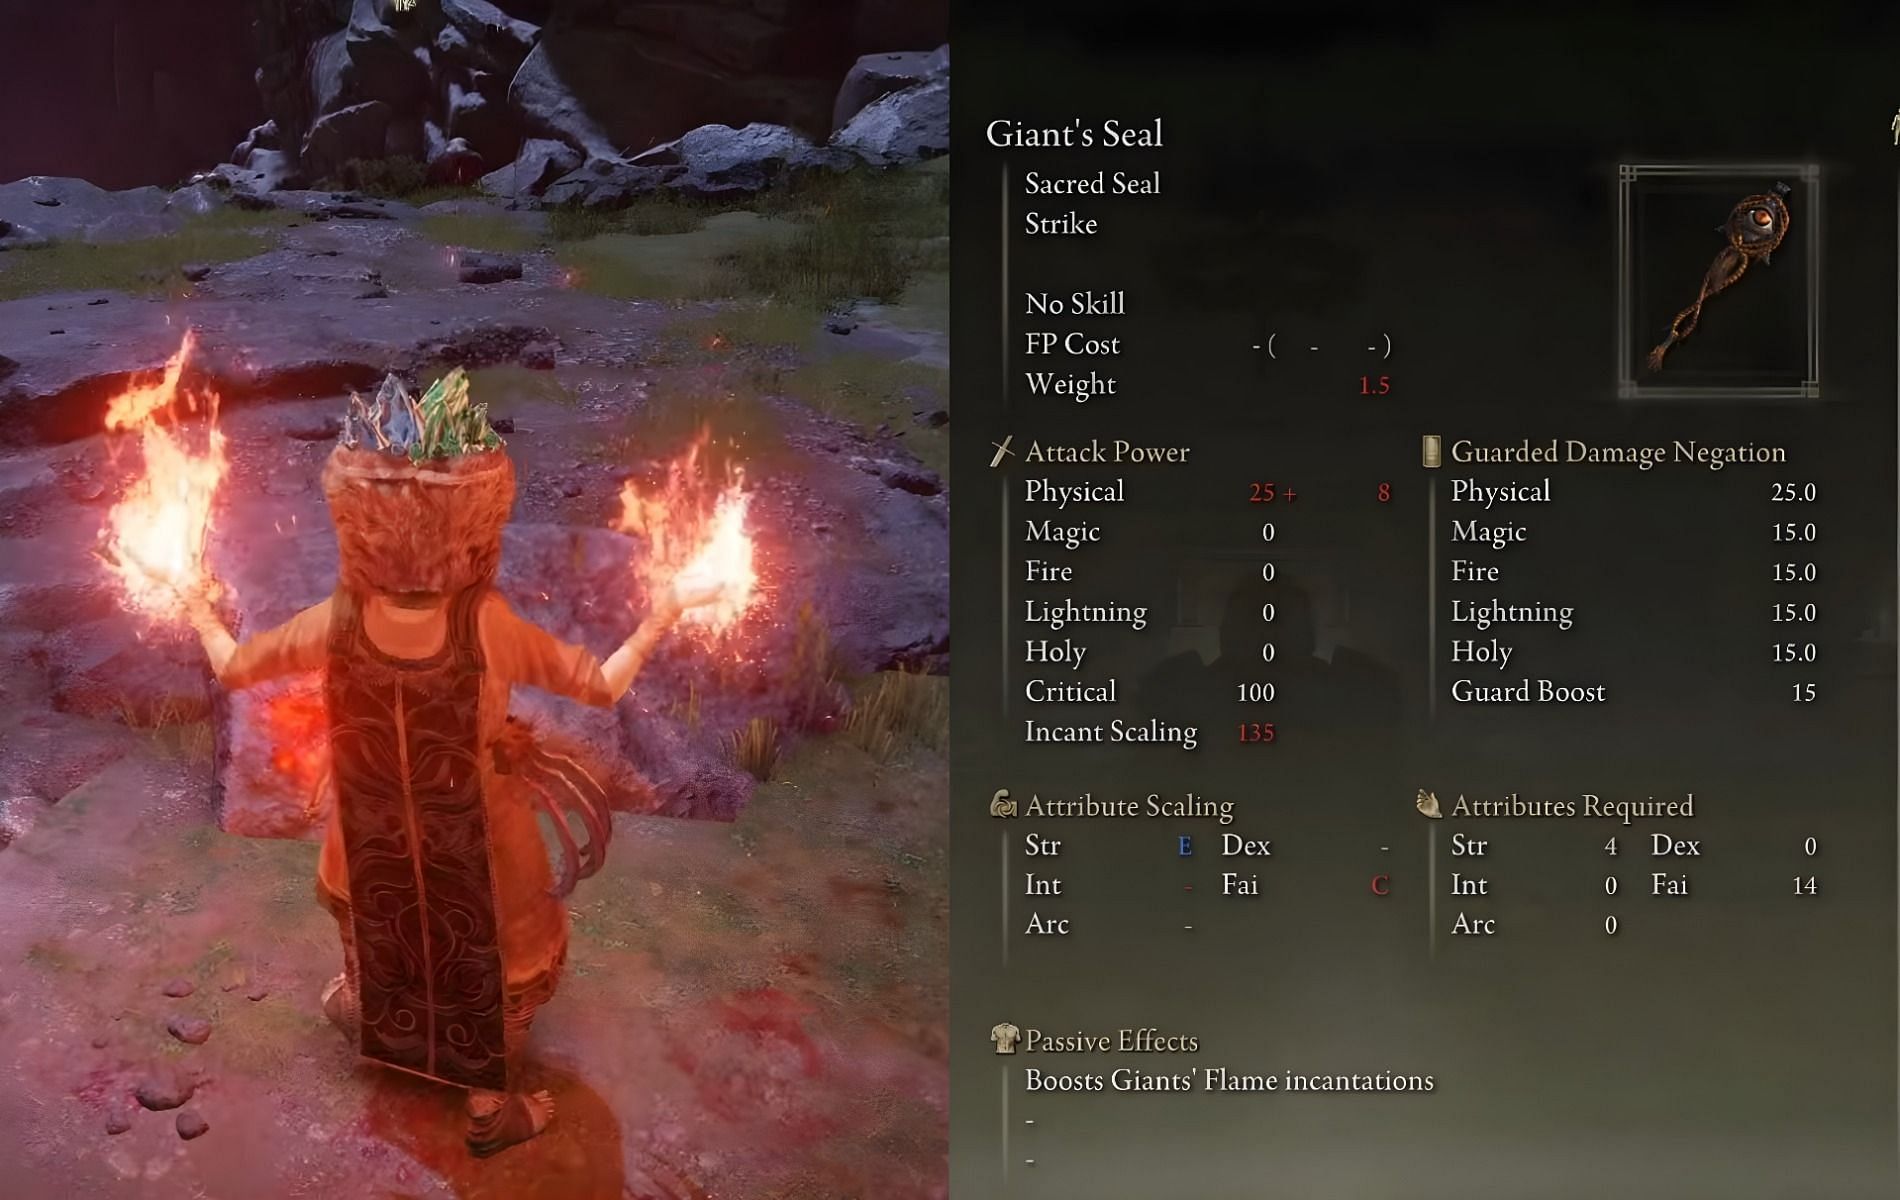 Elden Ring offers the Tarnished to go a step further and boost the damage of fire spells (Images via Elden Ring and FireSpark81/YouTube)